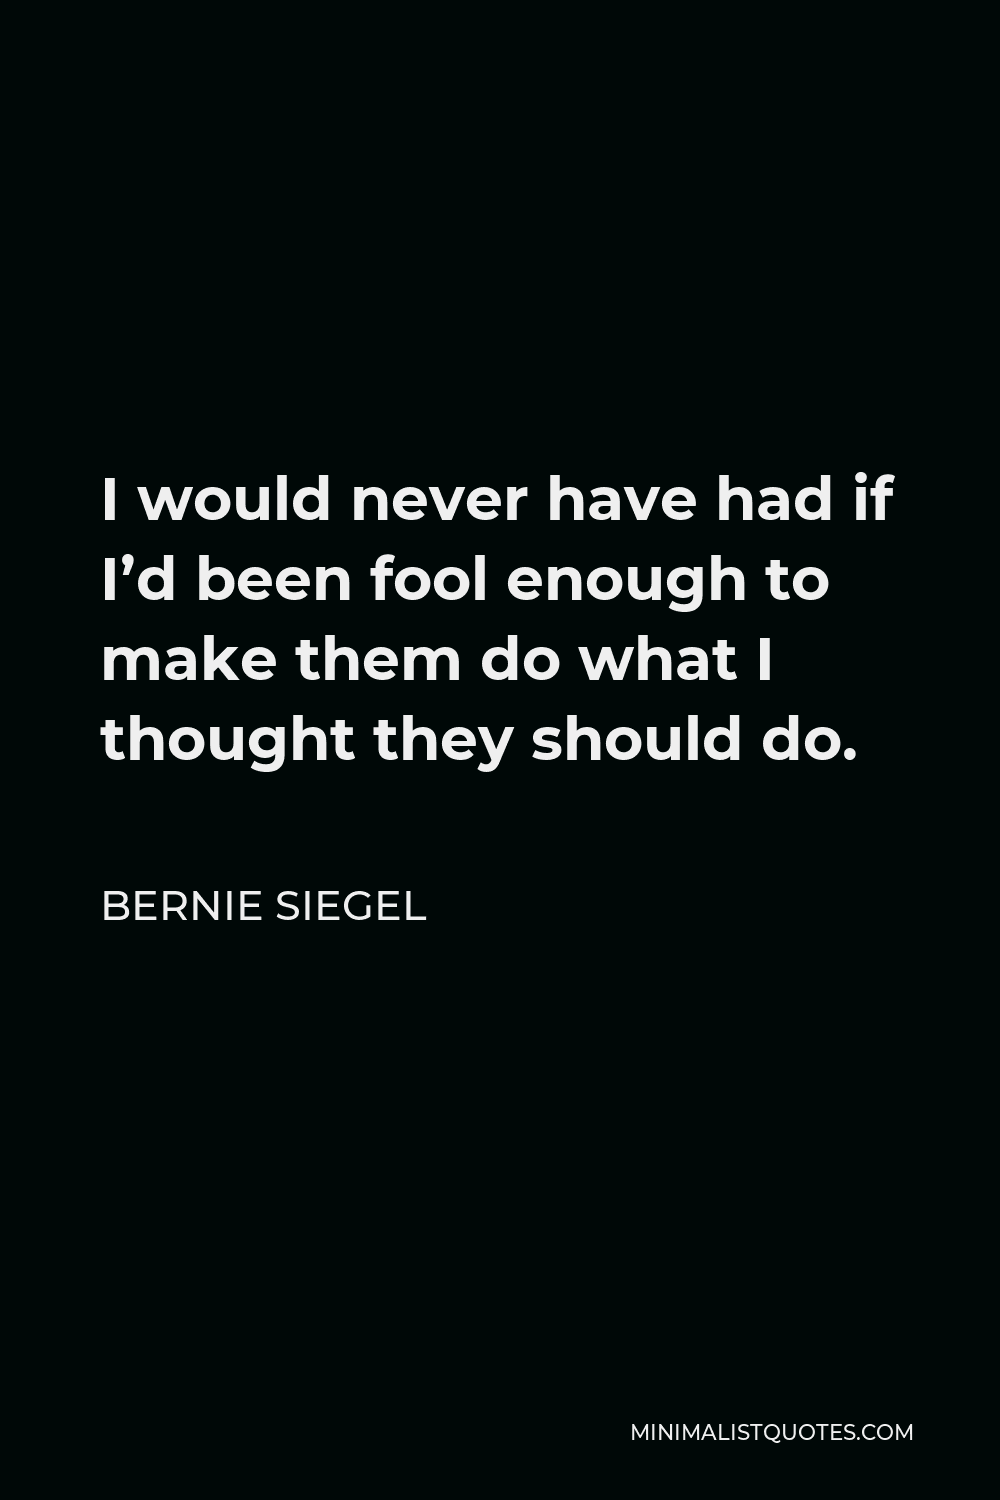 Bernie Siegel Quote - I would never have had if I’d been fool enough to make them do what I thought they should do.